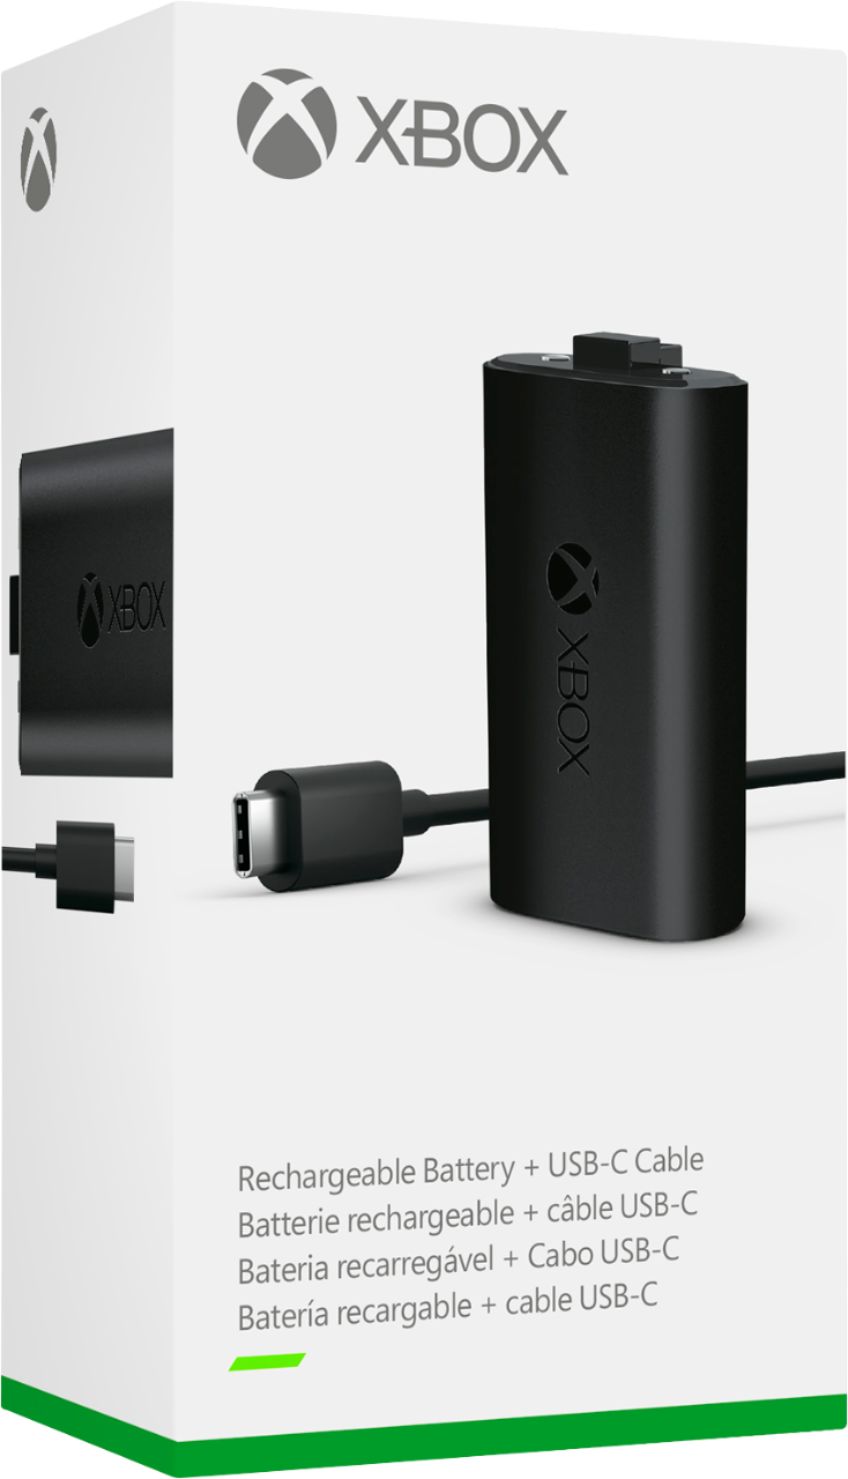 Microsoft Rechargeable Battery + USB-C Cable for Xbox Series X and Xbox  Series S Black SXW-00001 - Best Buy